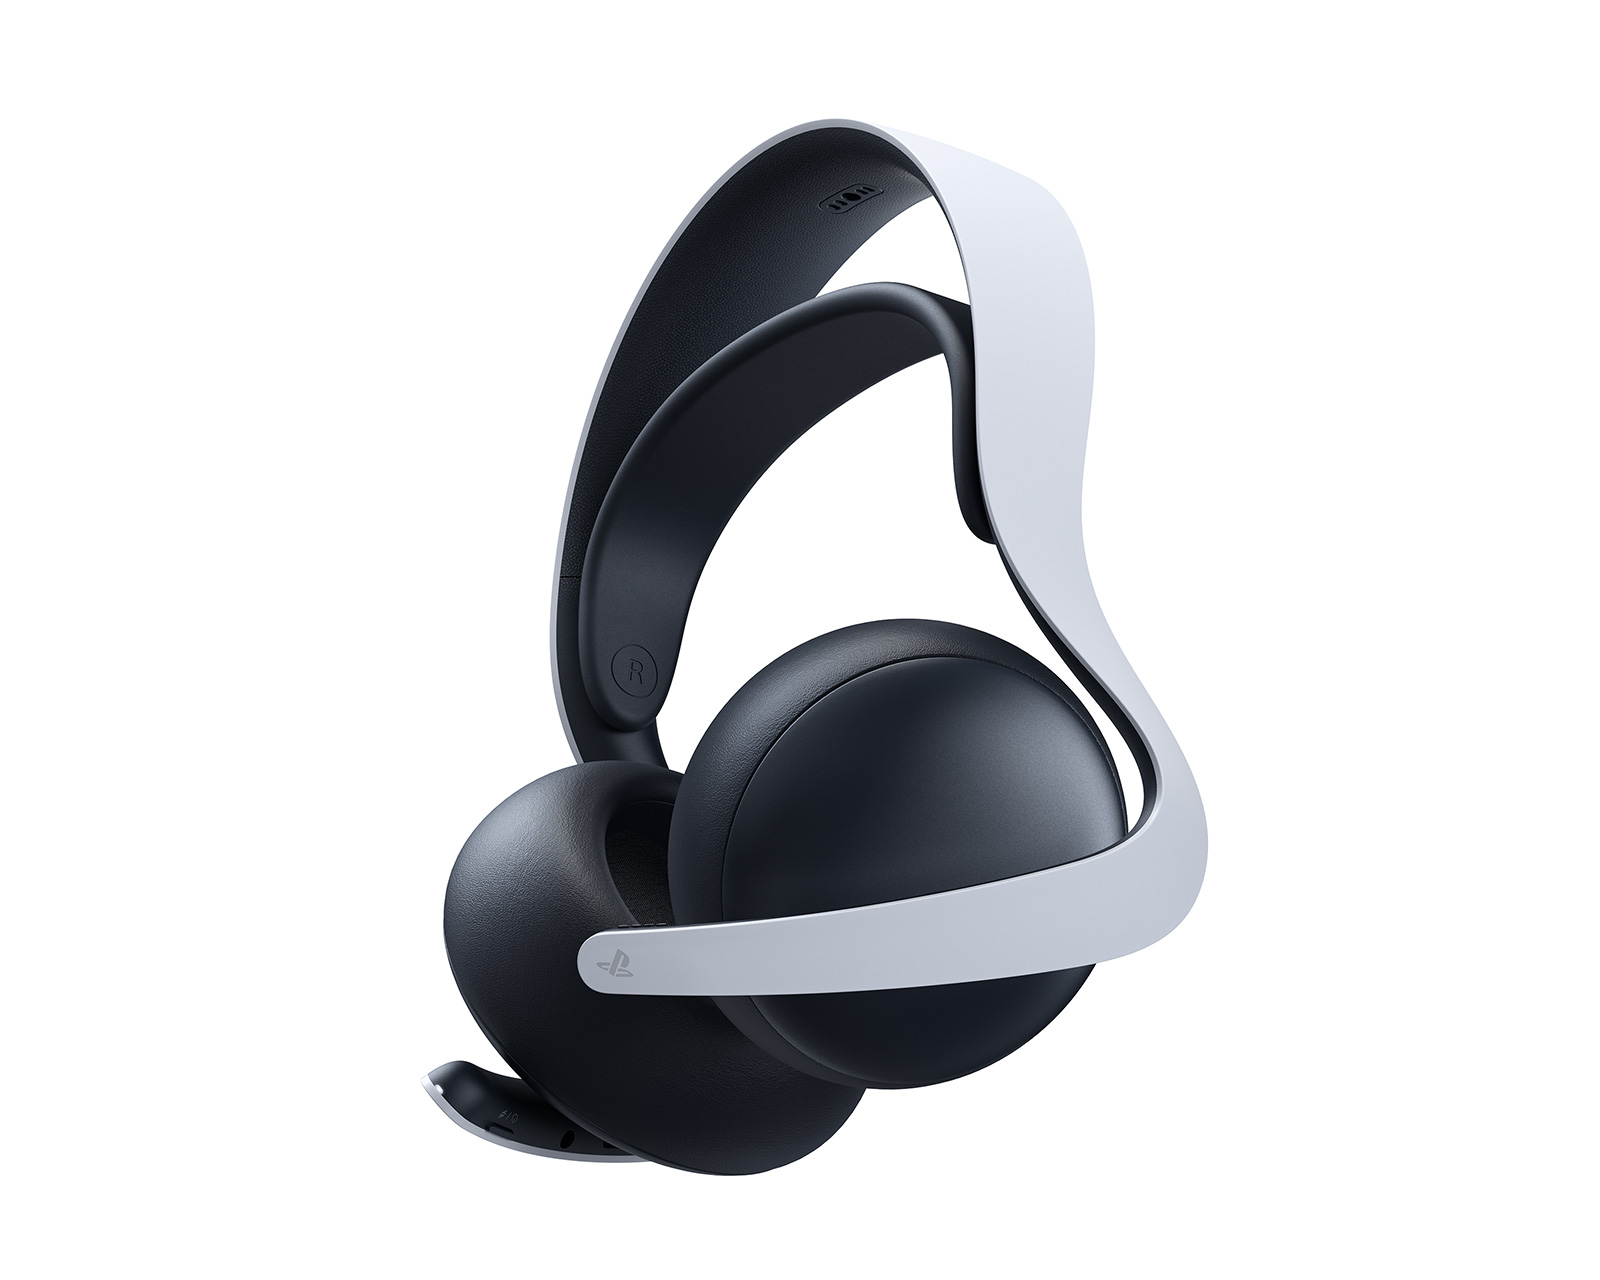 Playstation Pulse 3d Wireless Headset, Playstation Headsets